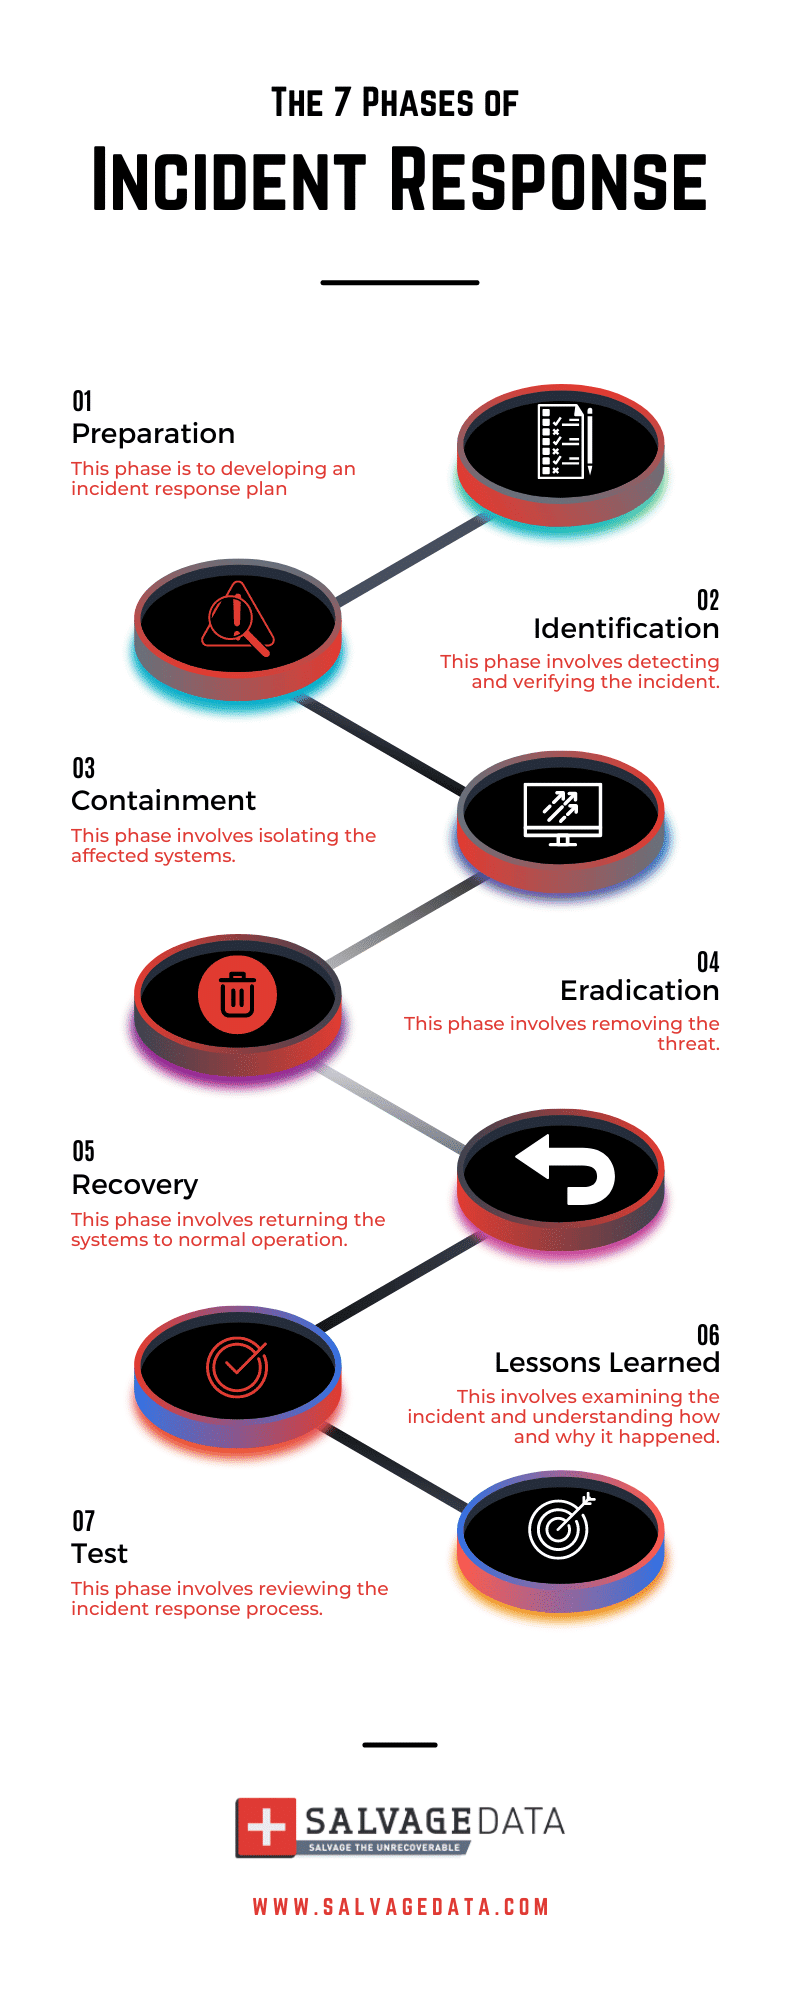 The 7 phases of incident response infographic